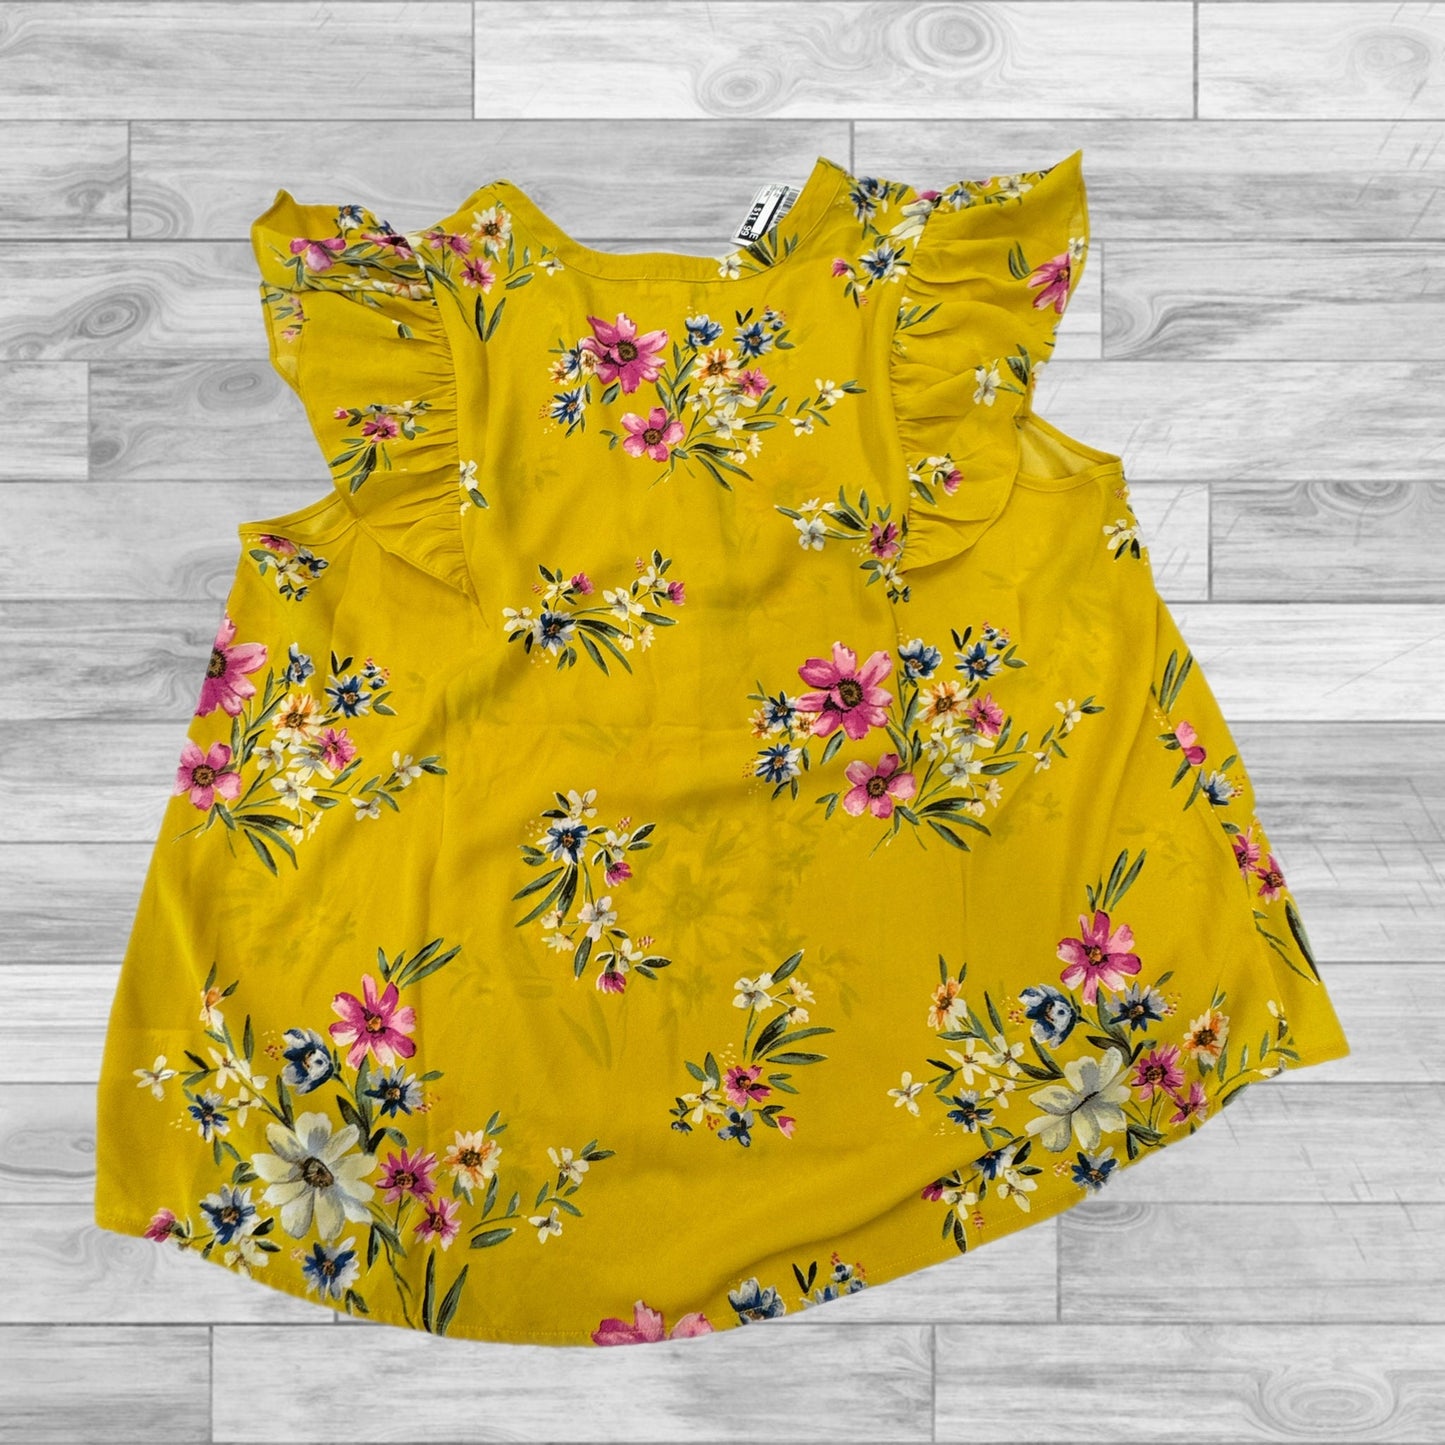 Yellow Top Short Sleeve Dr2, Size Xxl